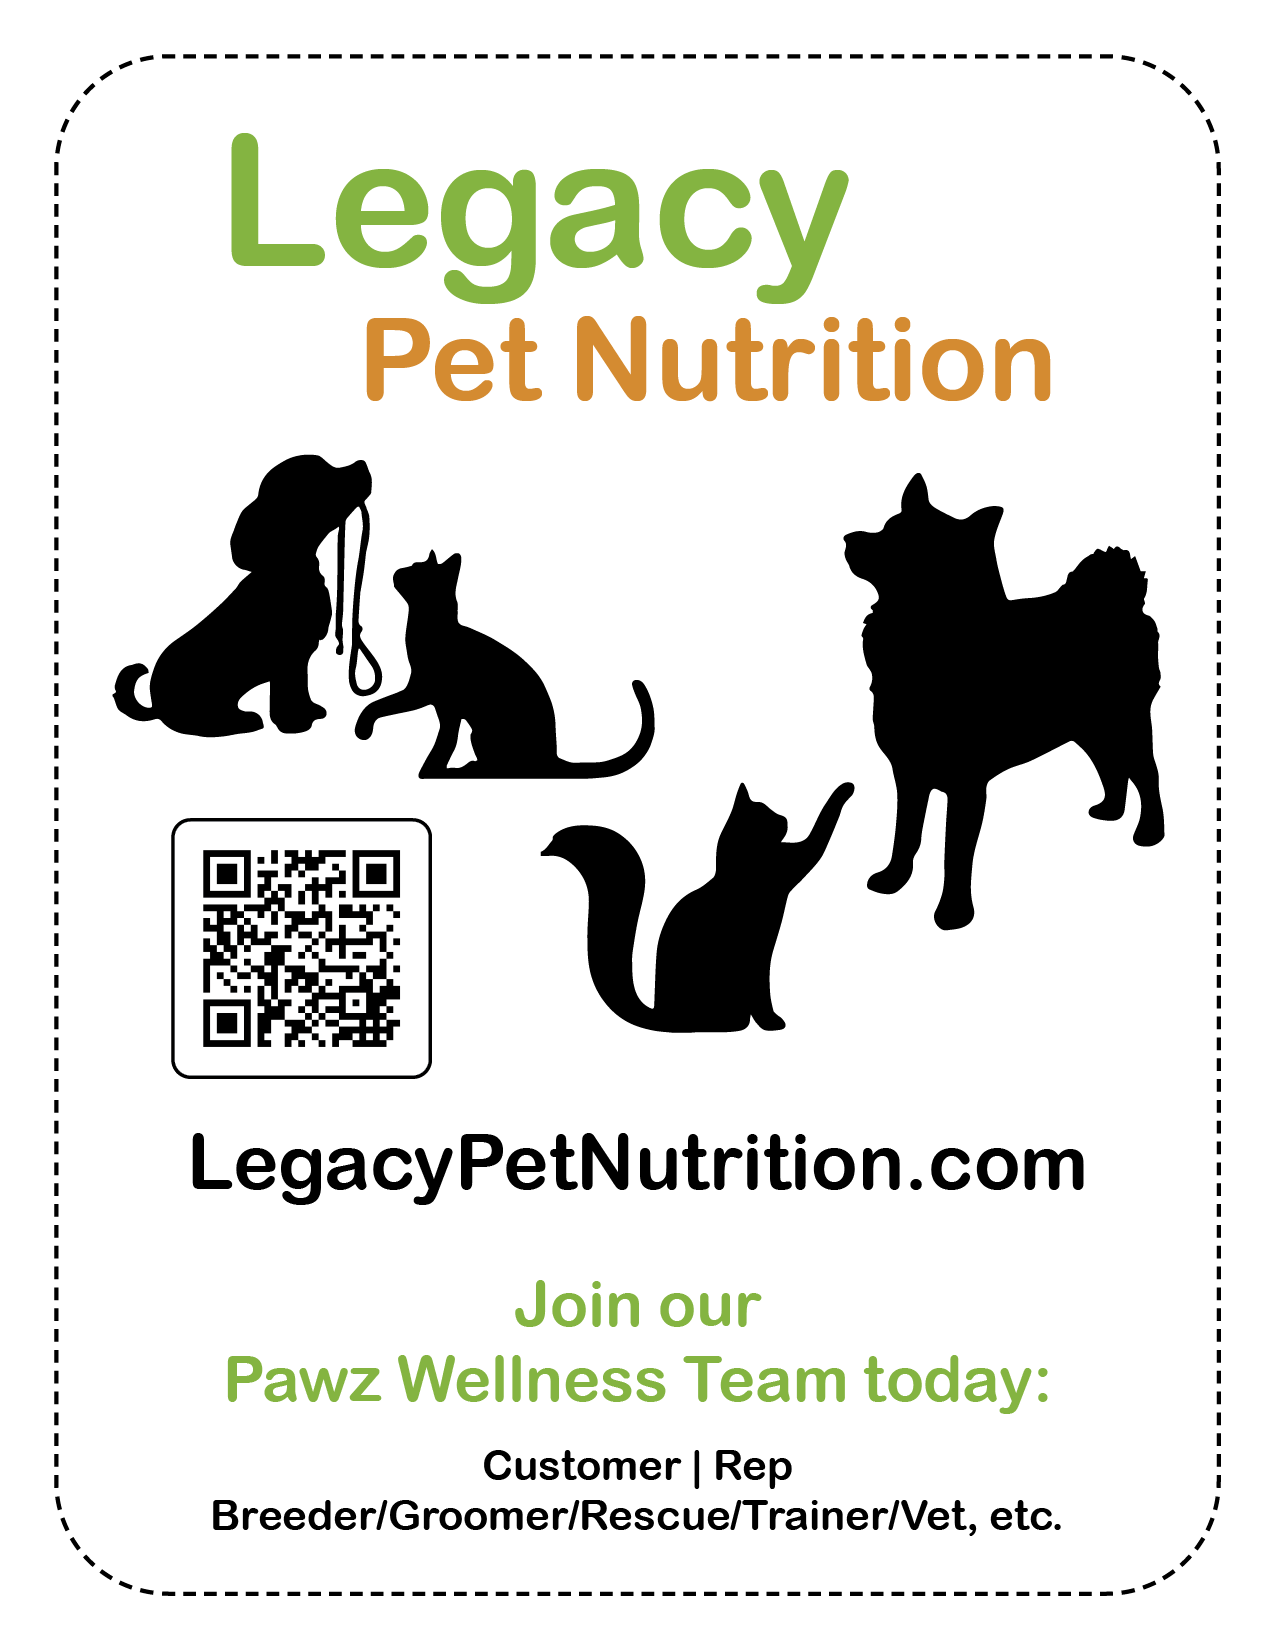 Join our Pawz Wellness Team - Legacy Pet Nutrition - customer, rep, breeder, groomer, rescue, trainer, vet